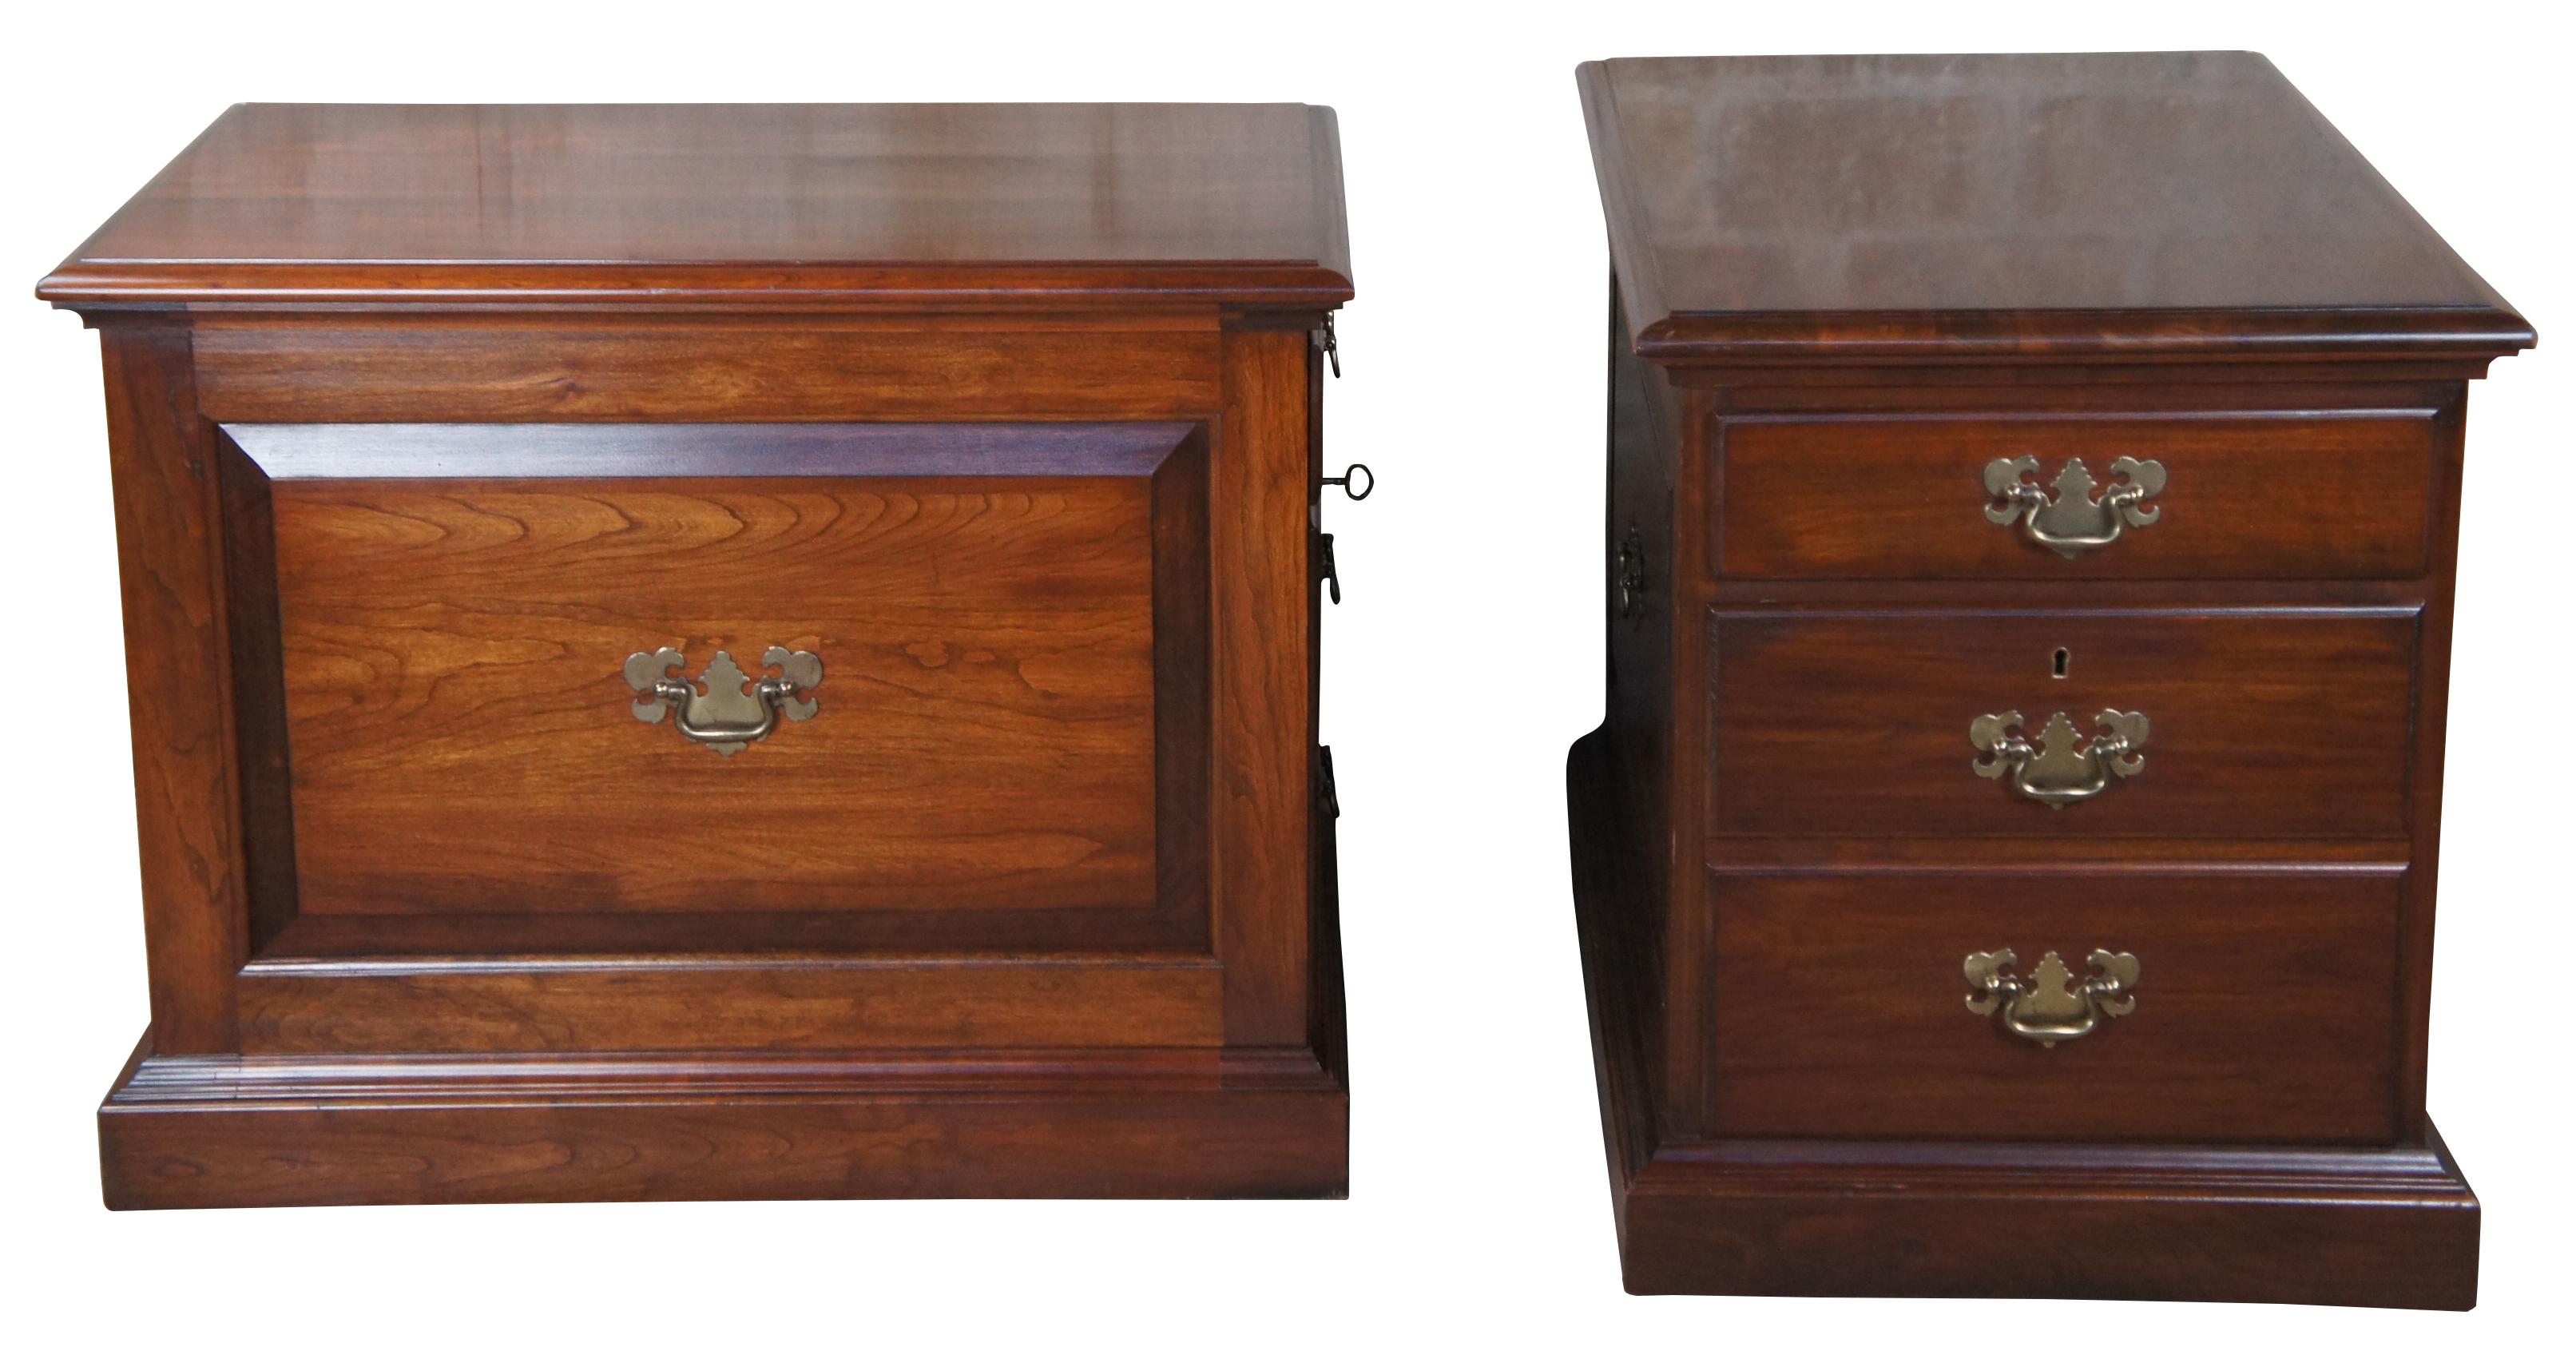 An exceptional and rare pair of side table or file cabinets by Pennsylvania House, circa 1960s. Made from solid cherry with oak drawer construction in Chippendale or Georgian manner. Features a upper drawer and large lower file drawer (dovetailed)